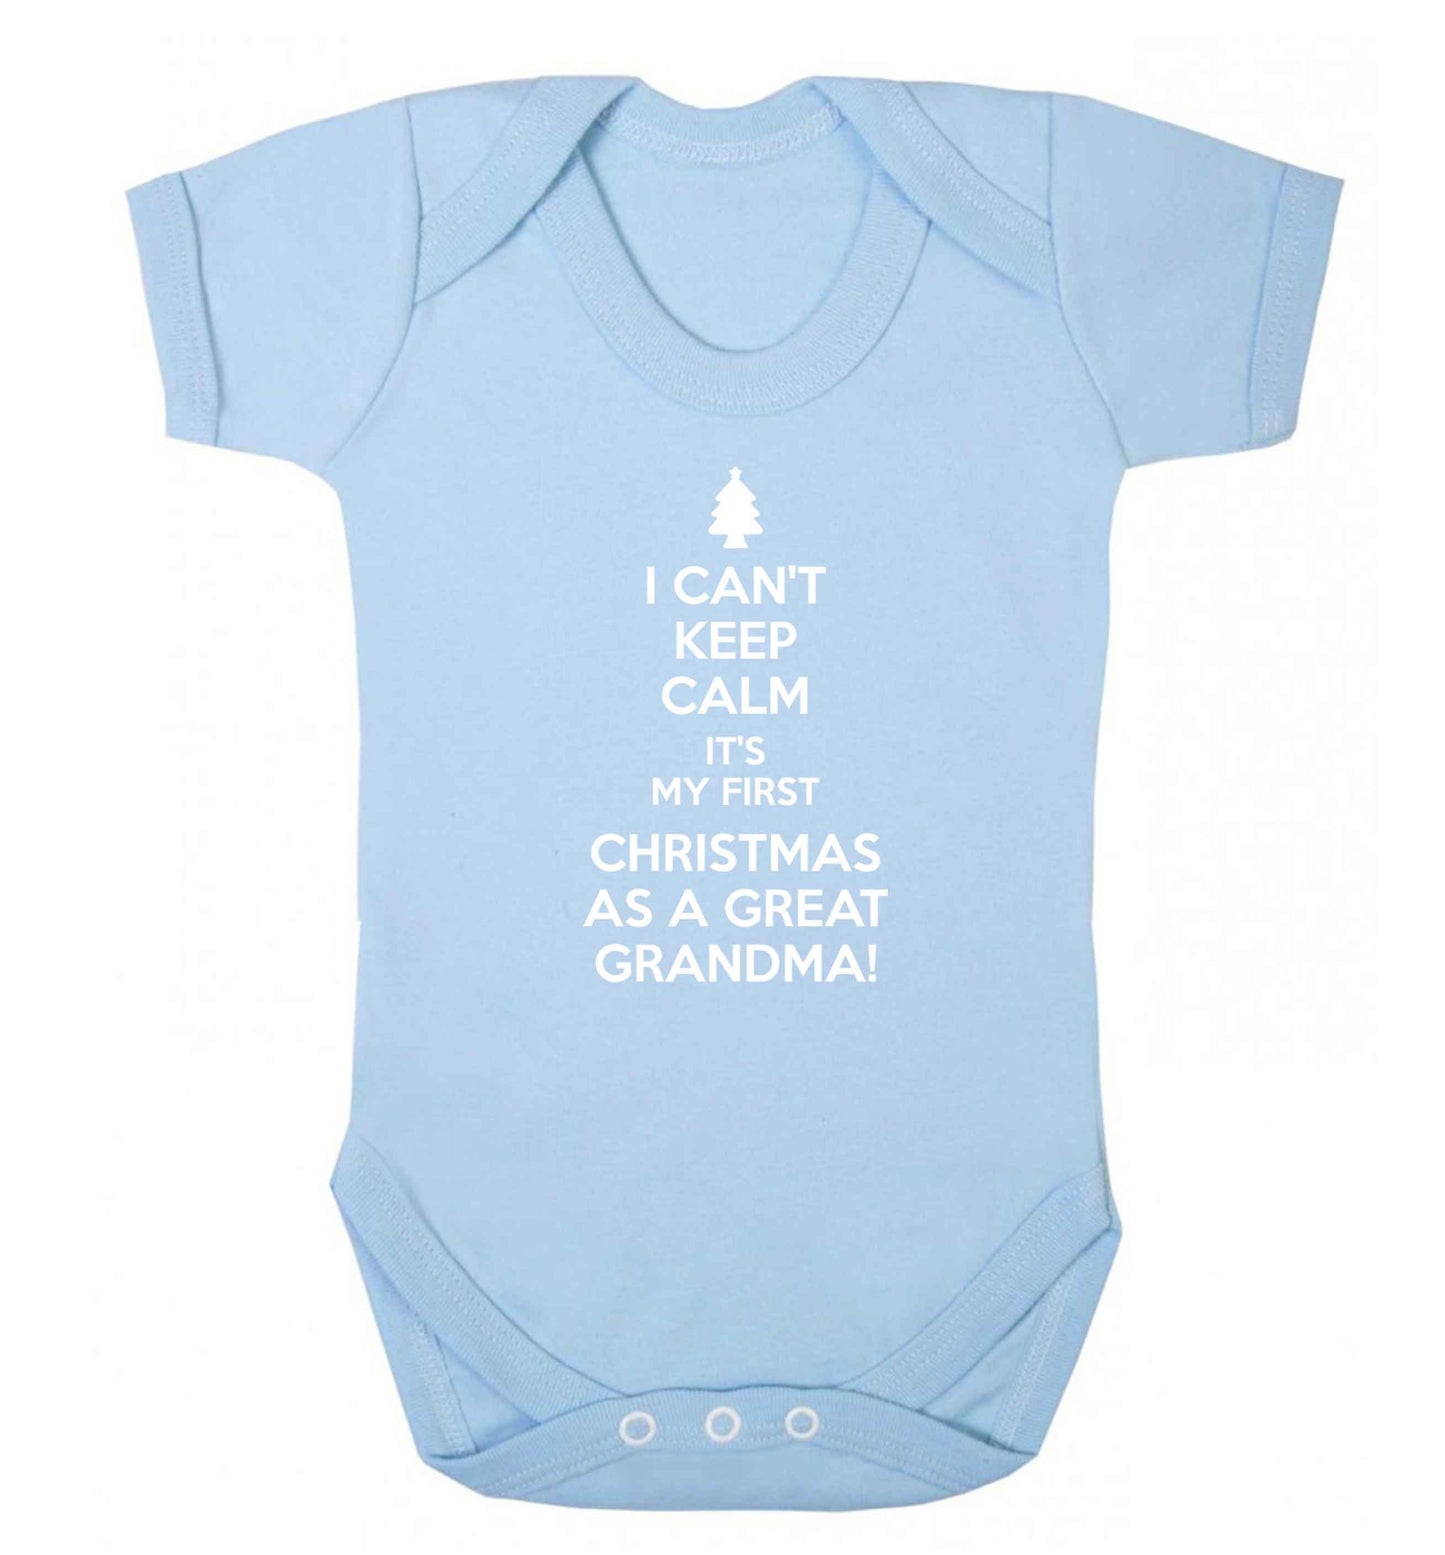 I can't keep calm it's my first Christmas as a great grandma! Baby Vest pale blue 18-24 months